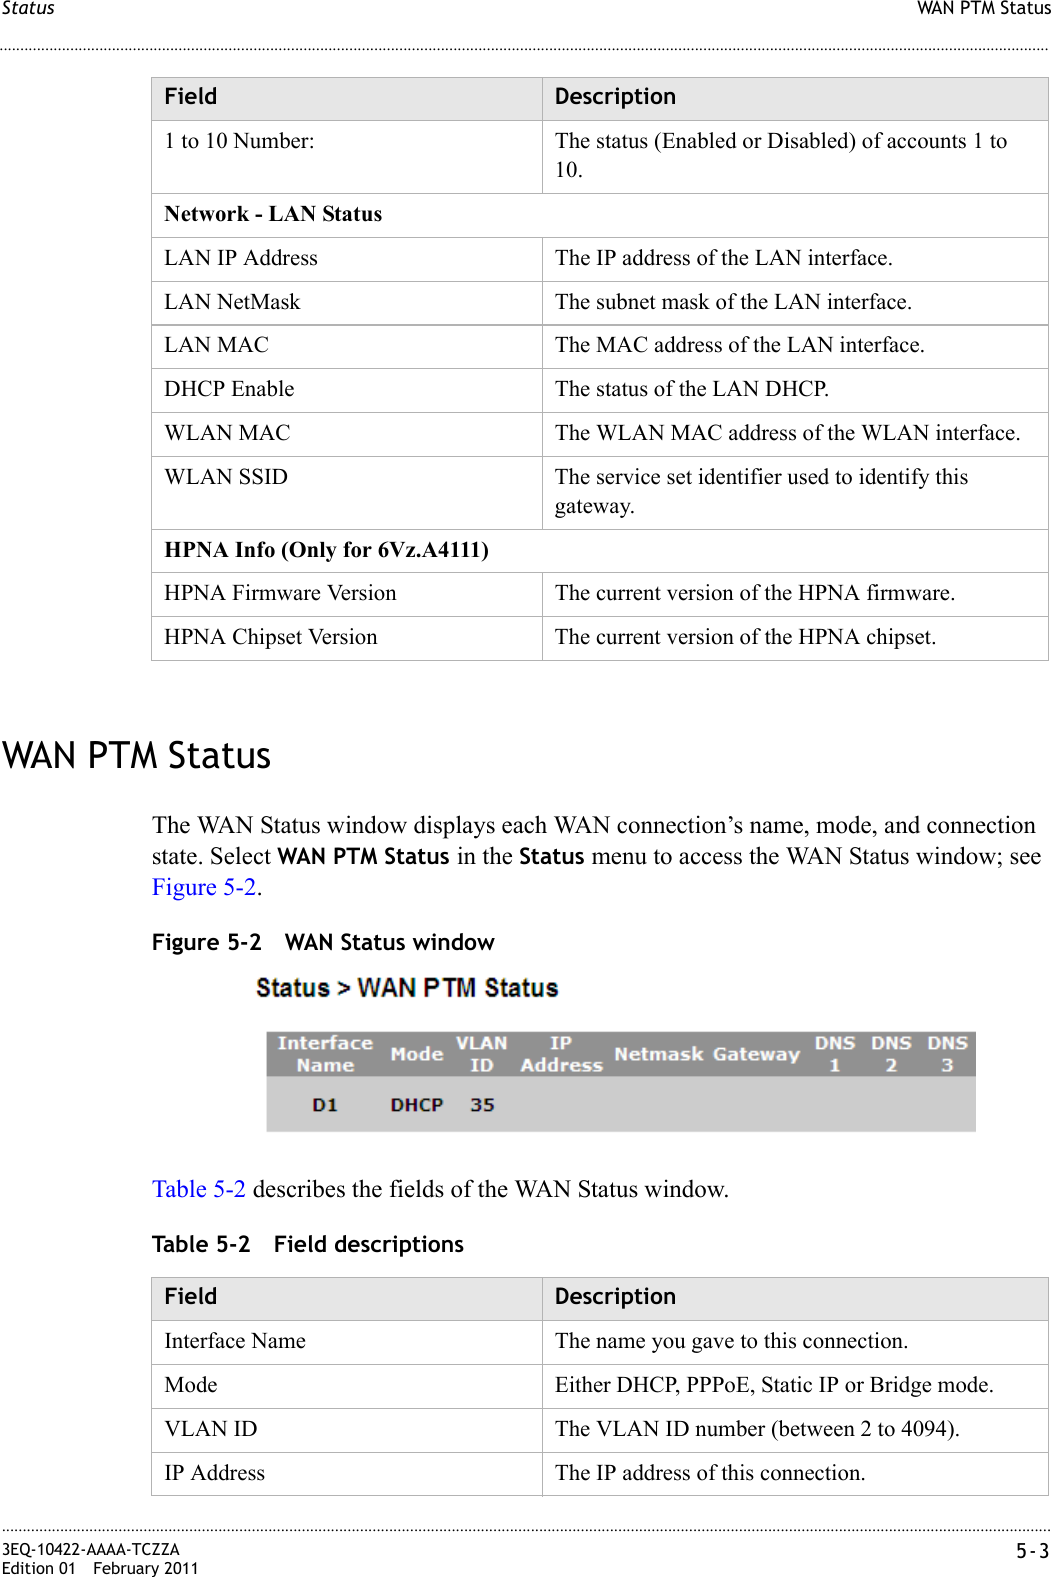 WAN PTM StatusStatus............................................................................................................................................................................................................................................................3EQ-10422-AAAA-TCZZAEdition 01 February 2011 5-3............................................................................................................................................................................................................................................................WAN PTM StatusThe WAN Status window displays each WAN connection’s name, mode, and connection state. Select WAN PTM Status in the Status menu to access the WAN Status window; see Figure 5-2.Figure 5-2 WAN Status windowTable 5-2 describes the fields of the WAN Status window.Table 5-2 Field descriptions1 to 10 Number: The status (Enabled or Disabled) of accounts 1 to 10.Network - LAN StatusLAN IP Address The IP address of the LAN interface.LAN NetMask The subnet mask of the LAN interface.LAN MAC The MAC address of the LAN interface.DHCP Enable The status of the LAN DHCP.WLAN MAC The WLAN MAC address of the WLAN interface.WLAN SSID The service set identifier used to identify this gateway.HPNA Info (Only for 6Vz.A4111)HPNA Firmware Version The current version of the HPNA firmware.HPNA Chipset Version The current version of the HPNA chipset.Field DescriptionField DescriptionInterface Name The name you gave to this connection.Mode Either DHCP, PPPoE, Static IP or Bridge mode.VLAN ID The VLAN ID number (between 2 to 4094).IP Address The IP address of this connection.